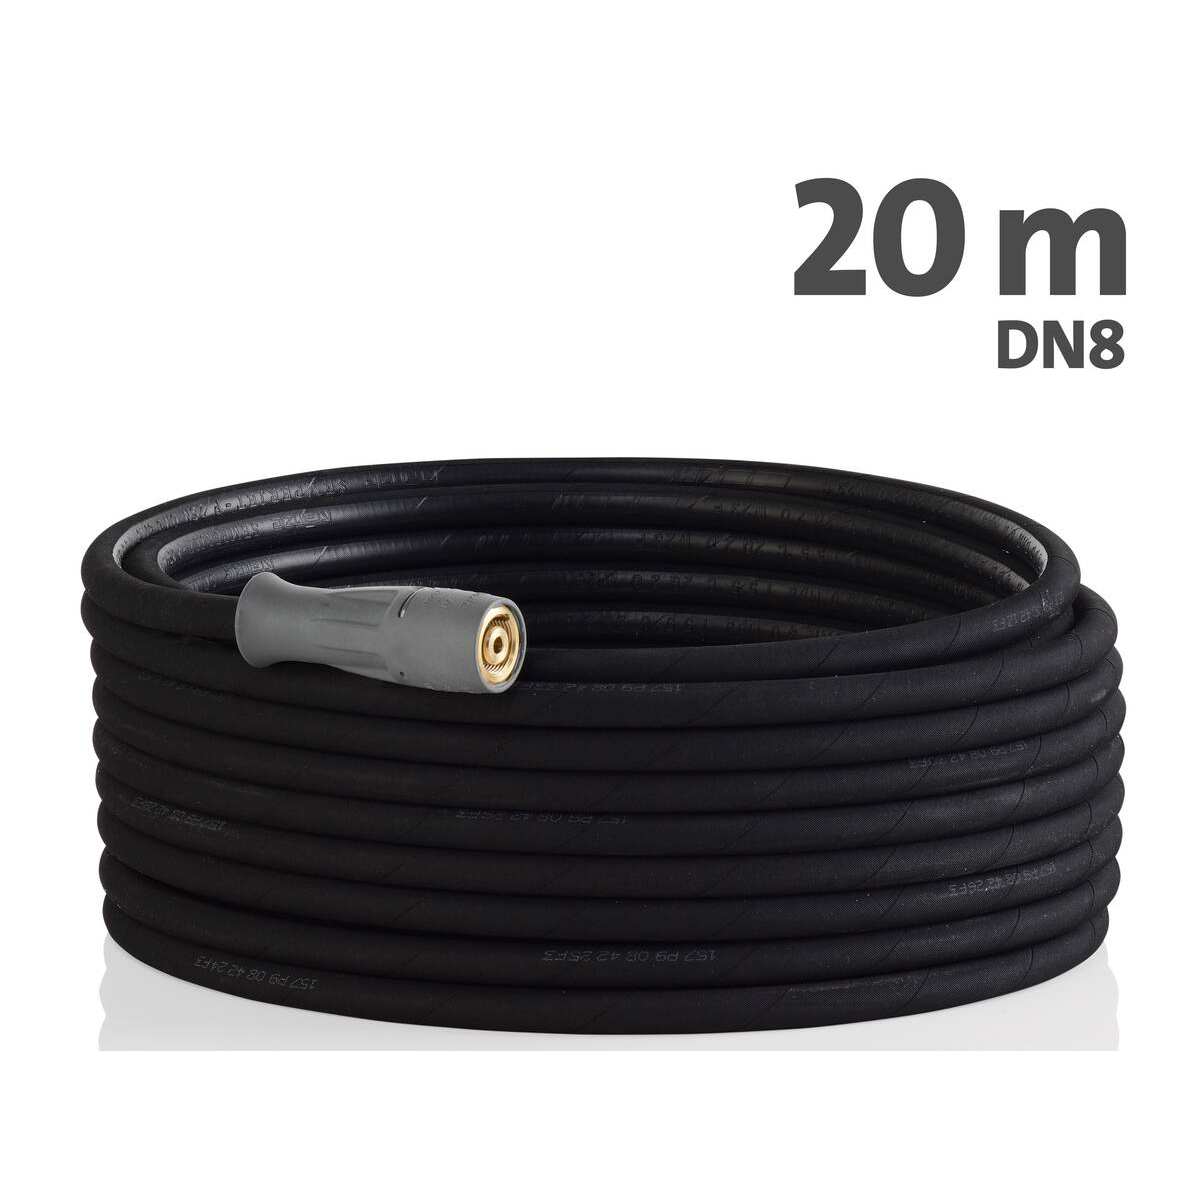 443812 - Therm High Pressure Hose 20m - Double Wire